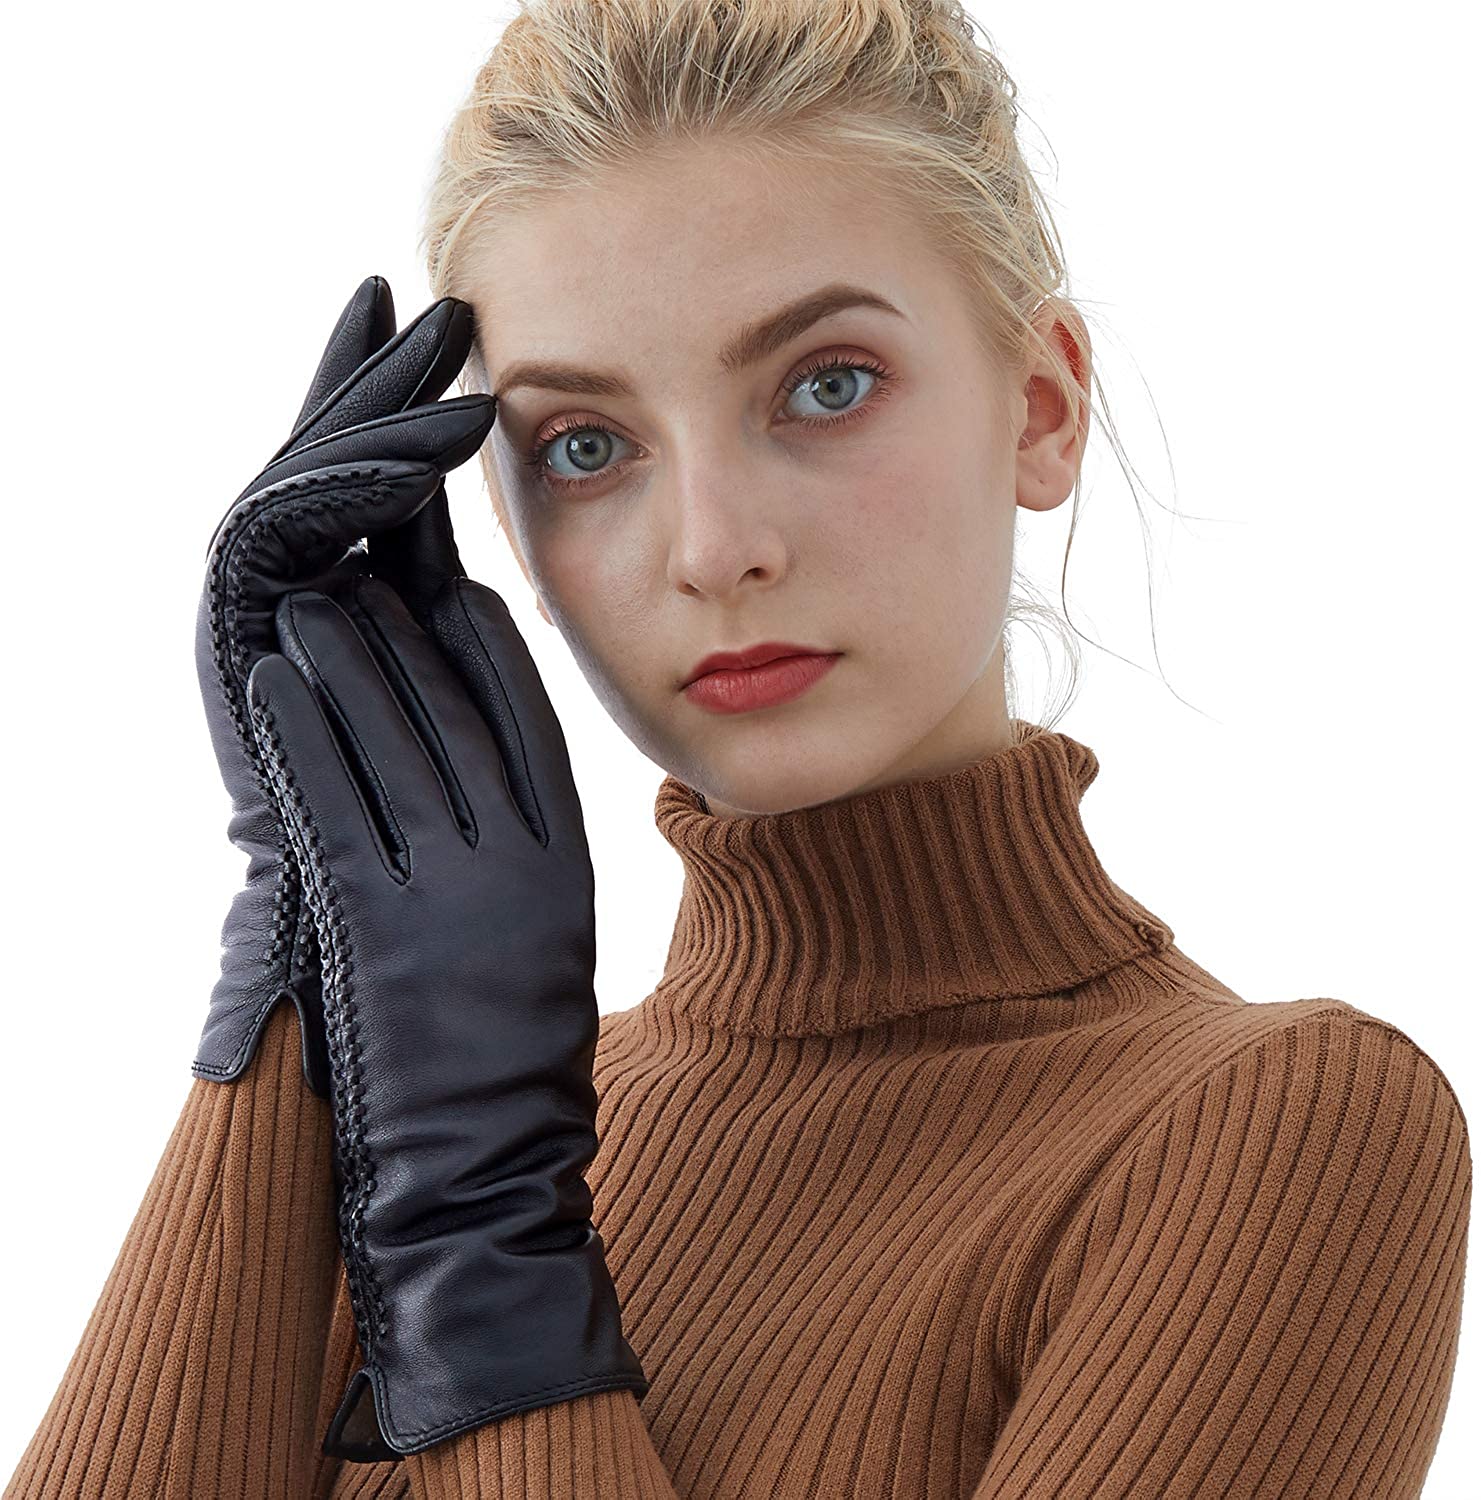 Genuine Sheepskin Leather Gloves For Women Winter Warm Touchscreen Texting Lined Driving Motorcycle Dress Gloves 